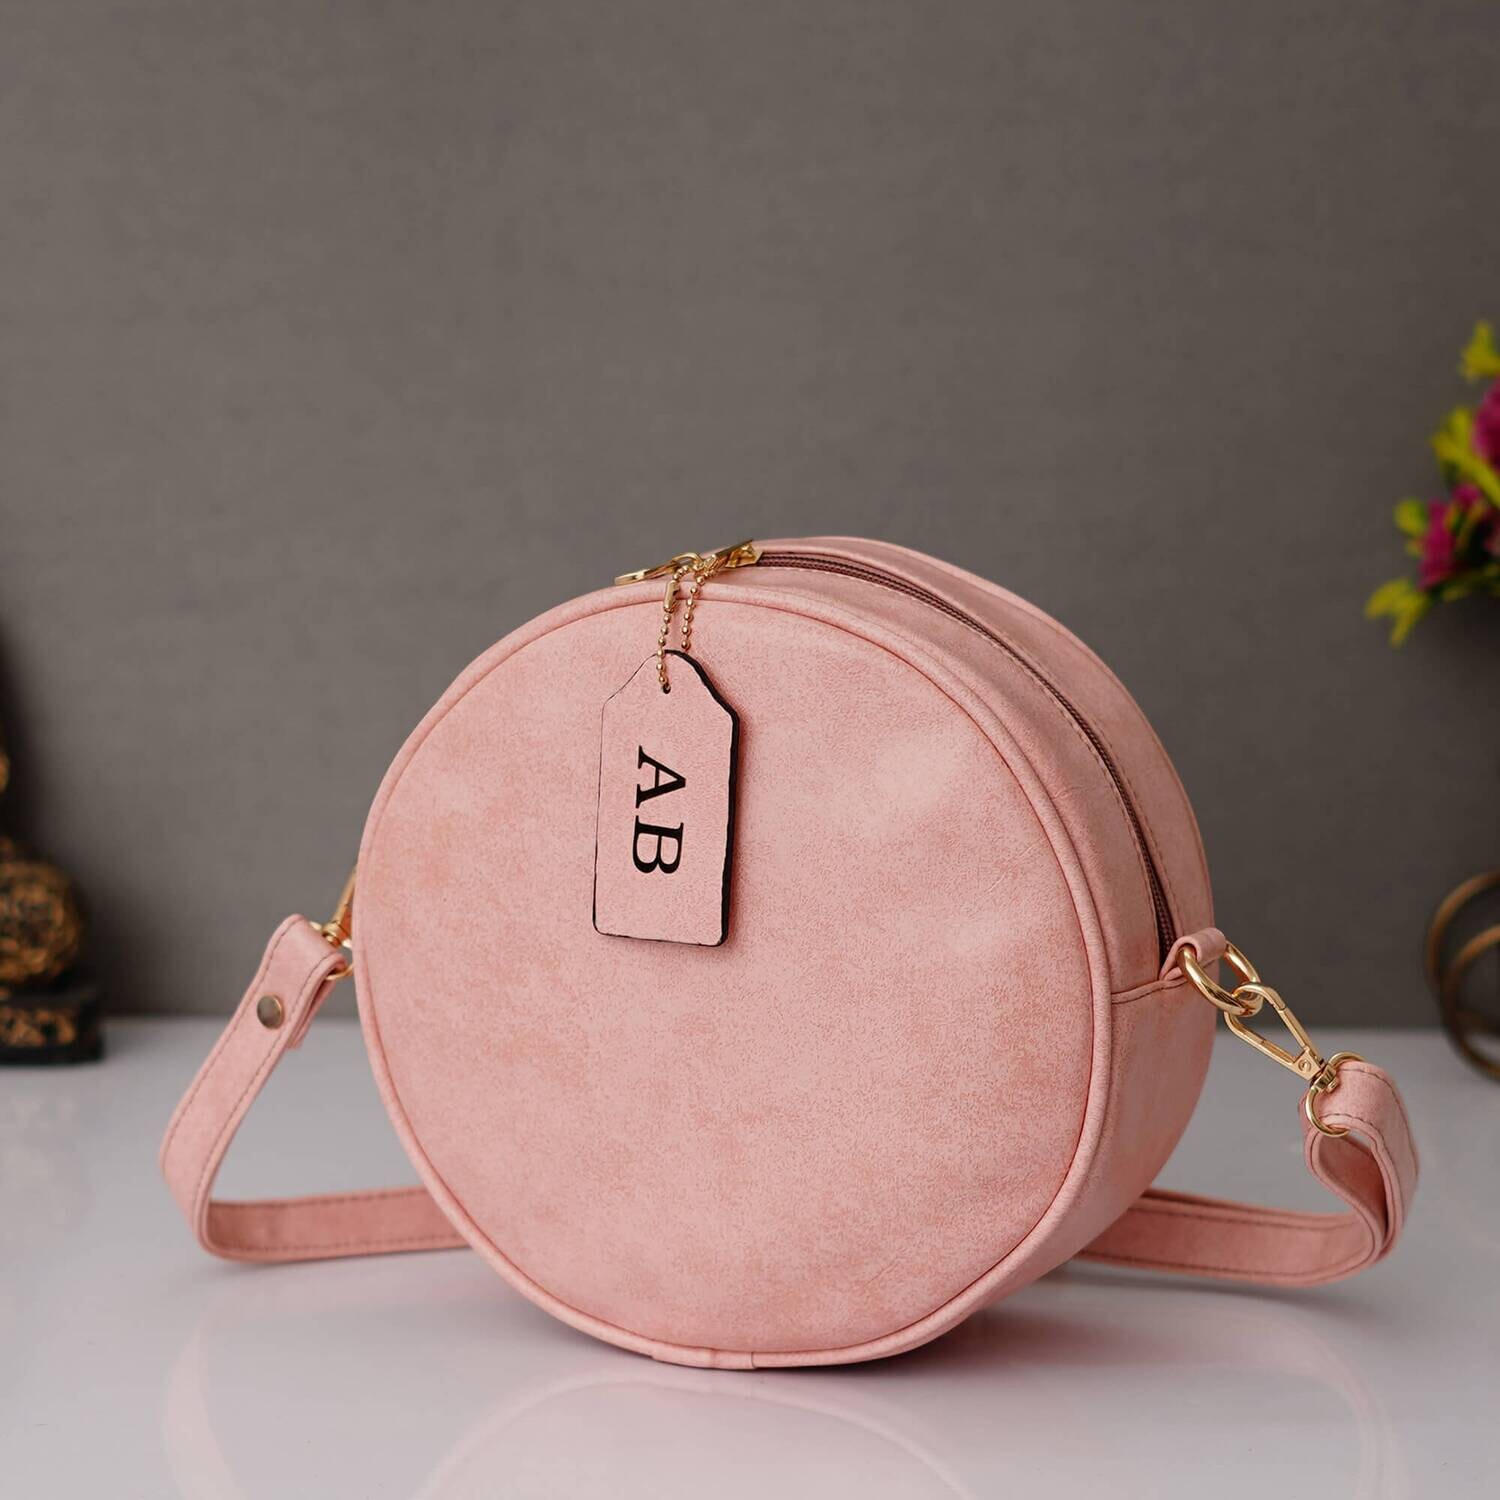 Baby Pink Customised Round Sling Bag - Imported Leather